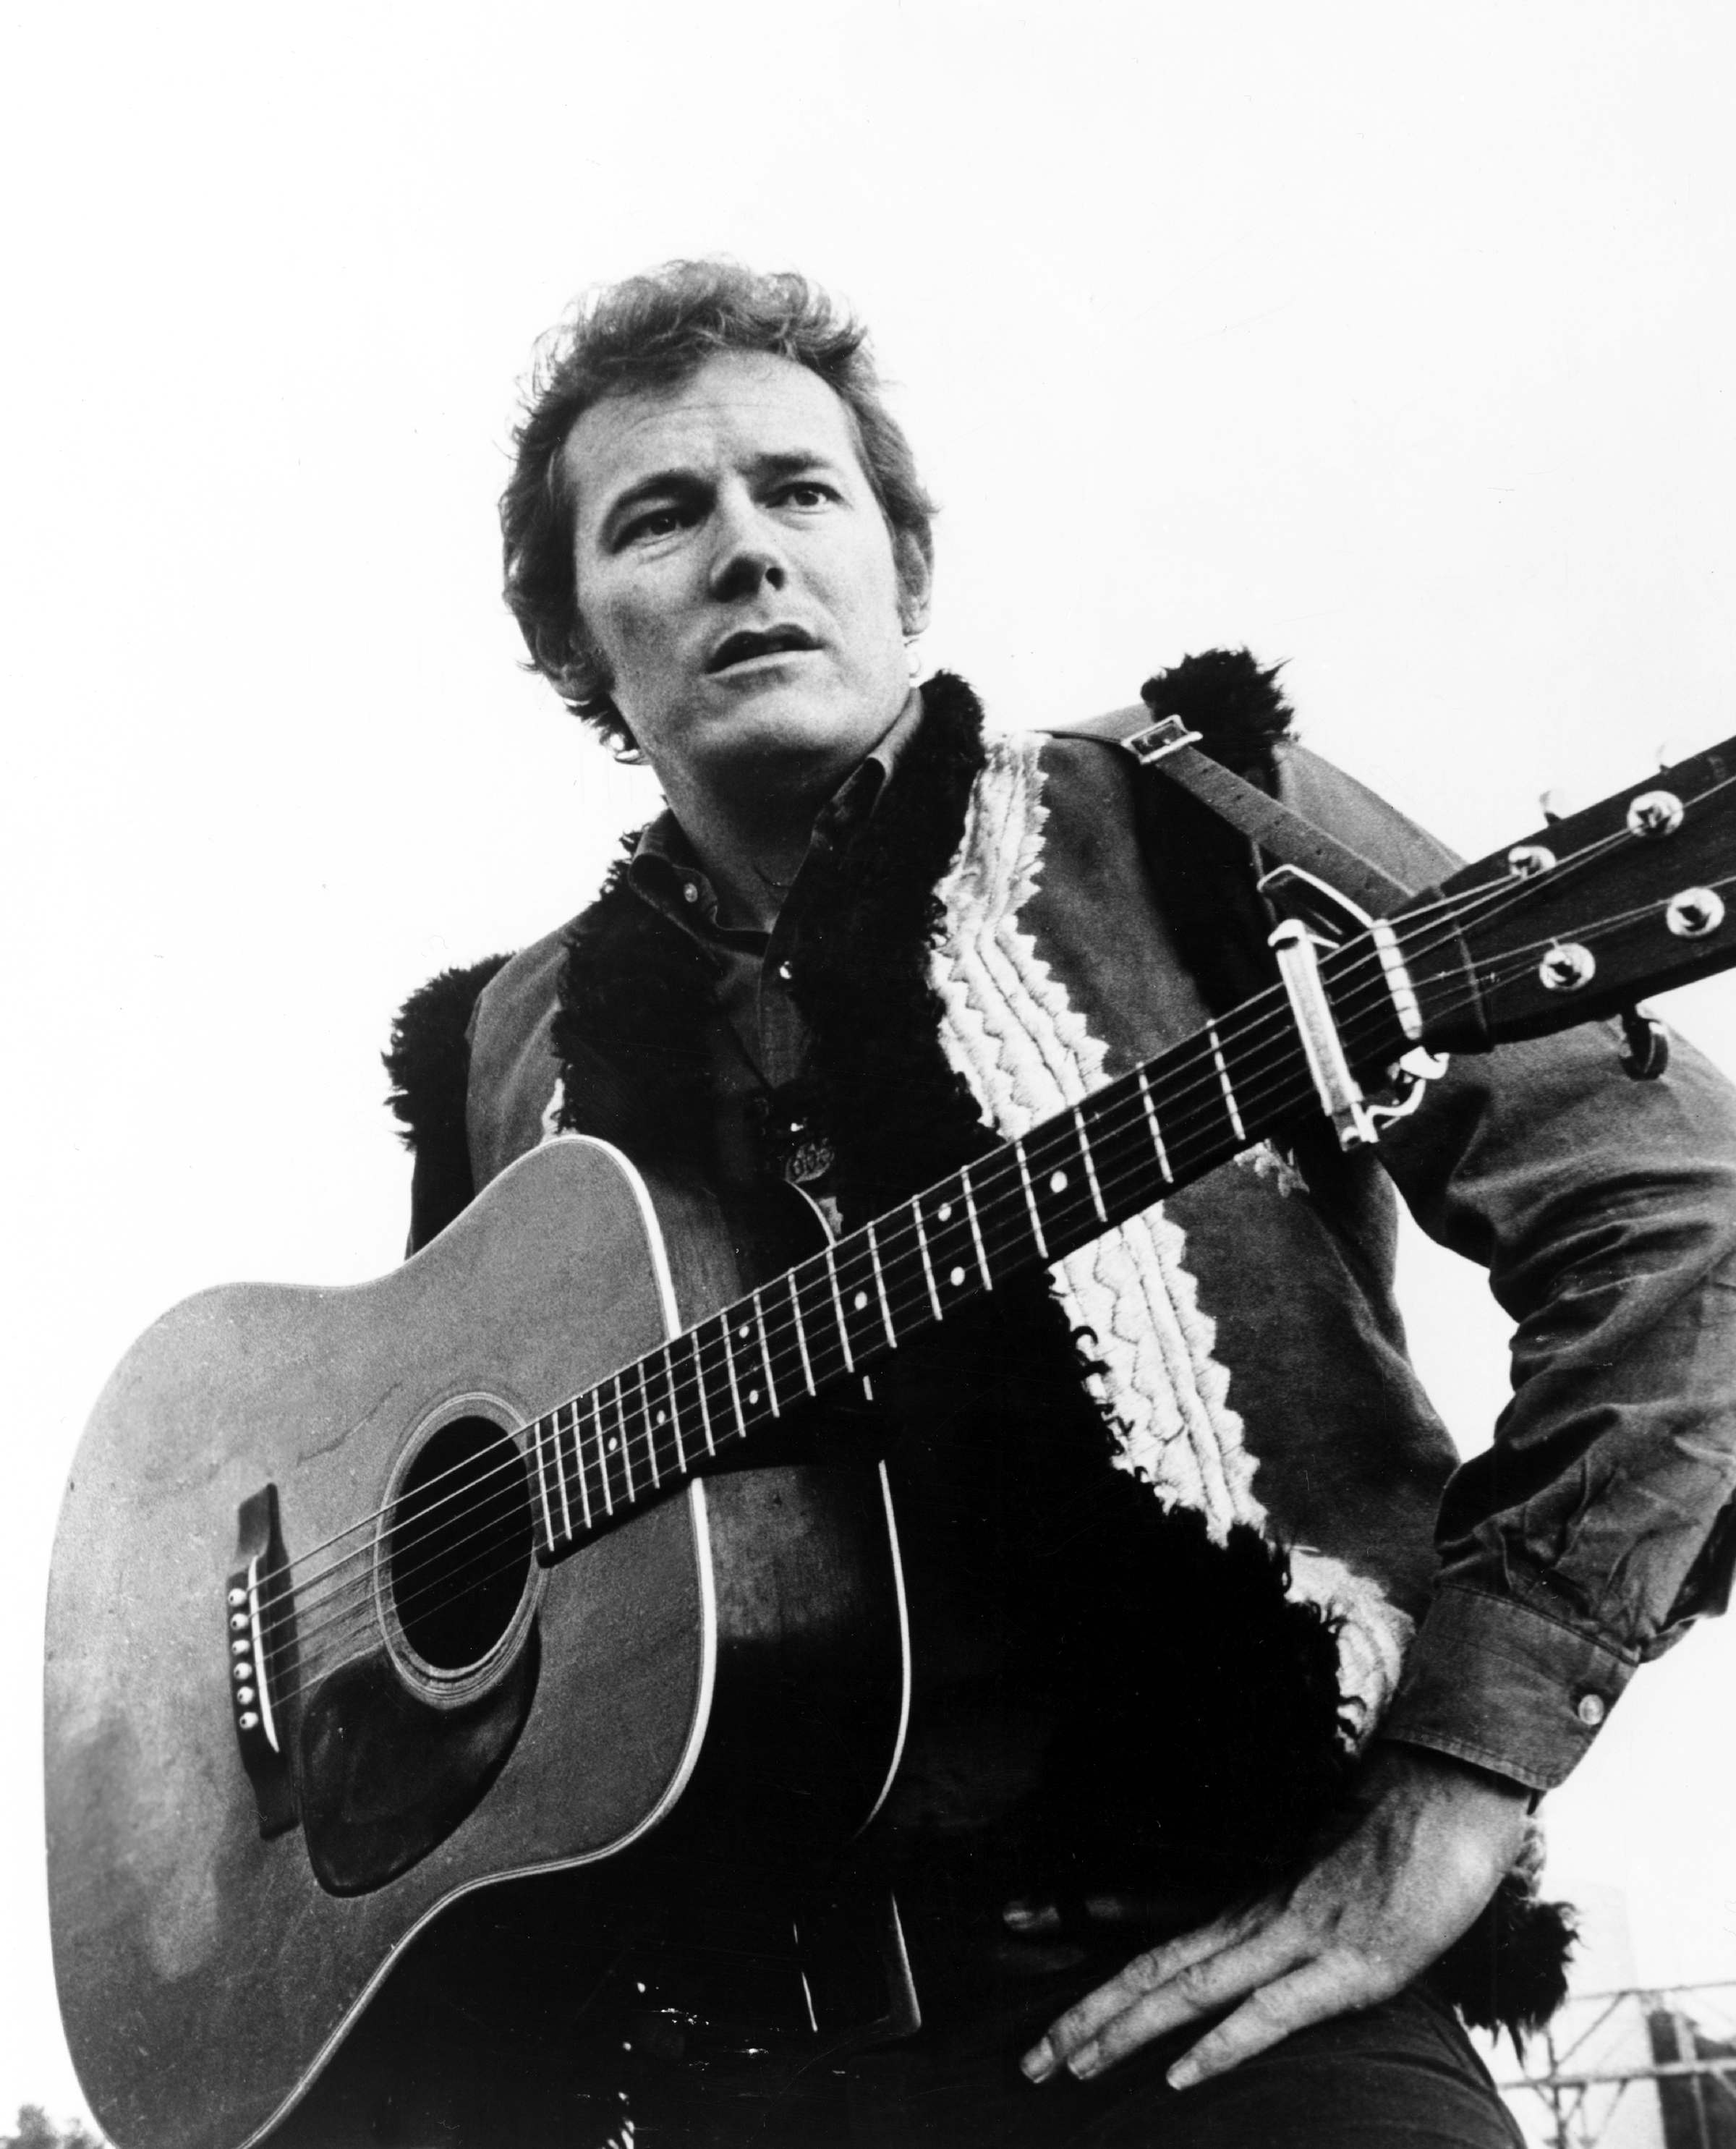 Gordon Lightfoot poses with his guitar, circa 1971. | Source: Getty Images